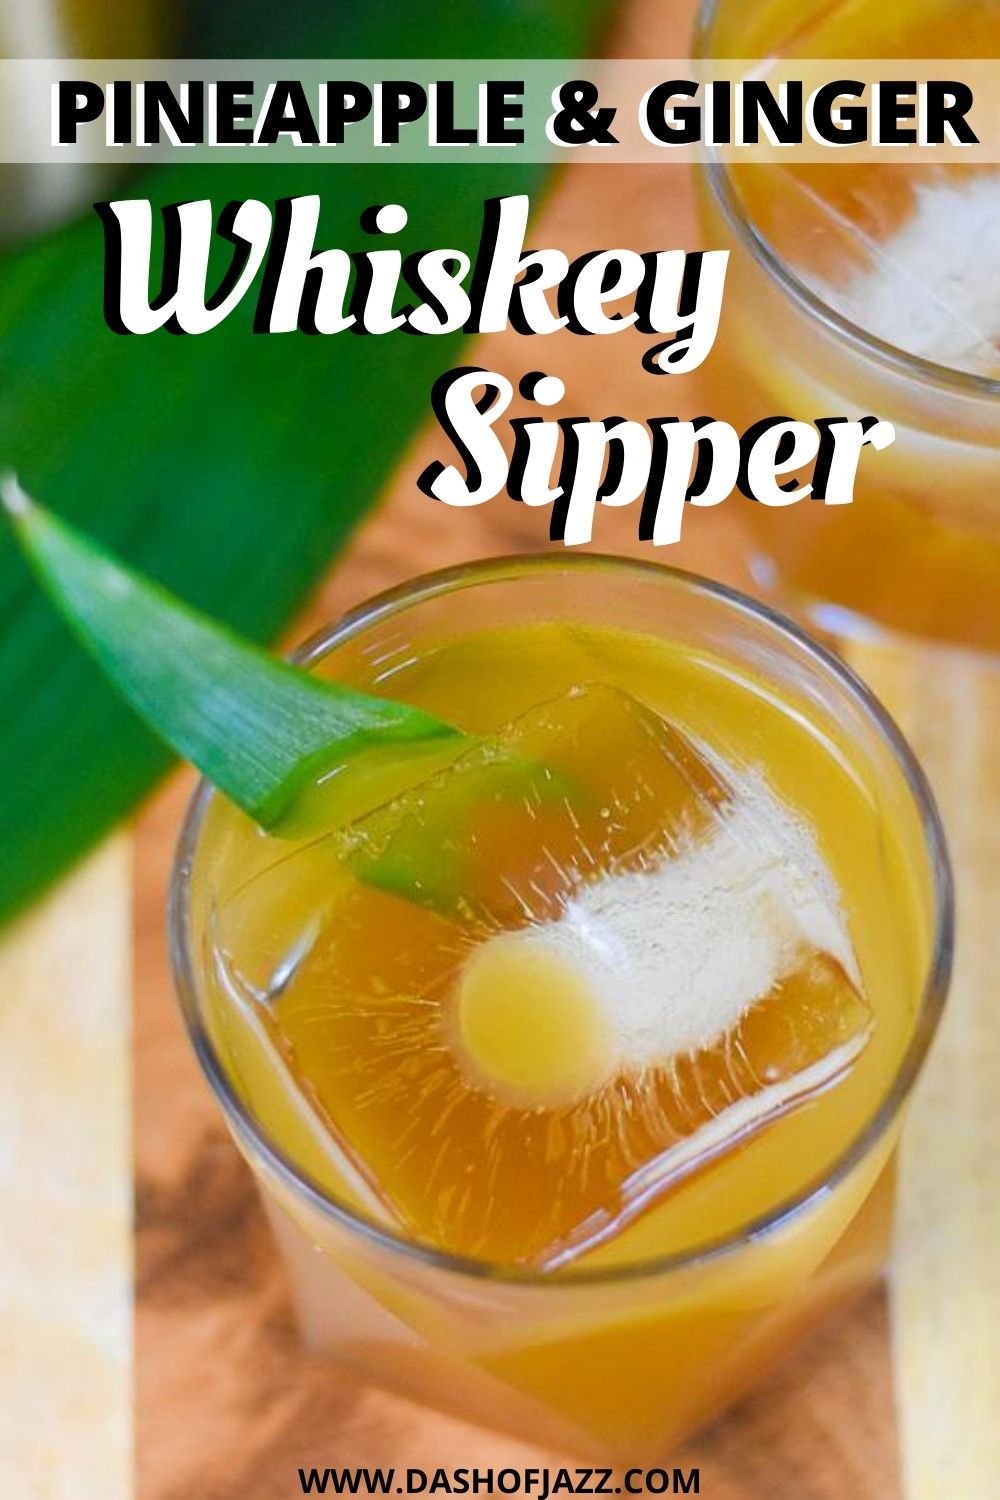 overhead of cocktail in glass over large ice cube with text overlay "pineapple & ginger whiskey sipper"